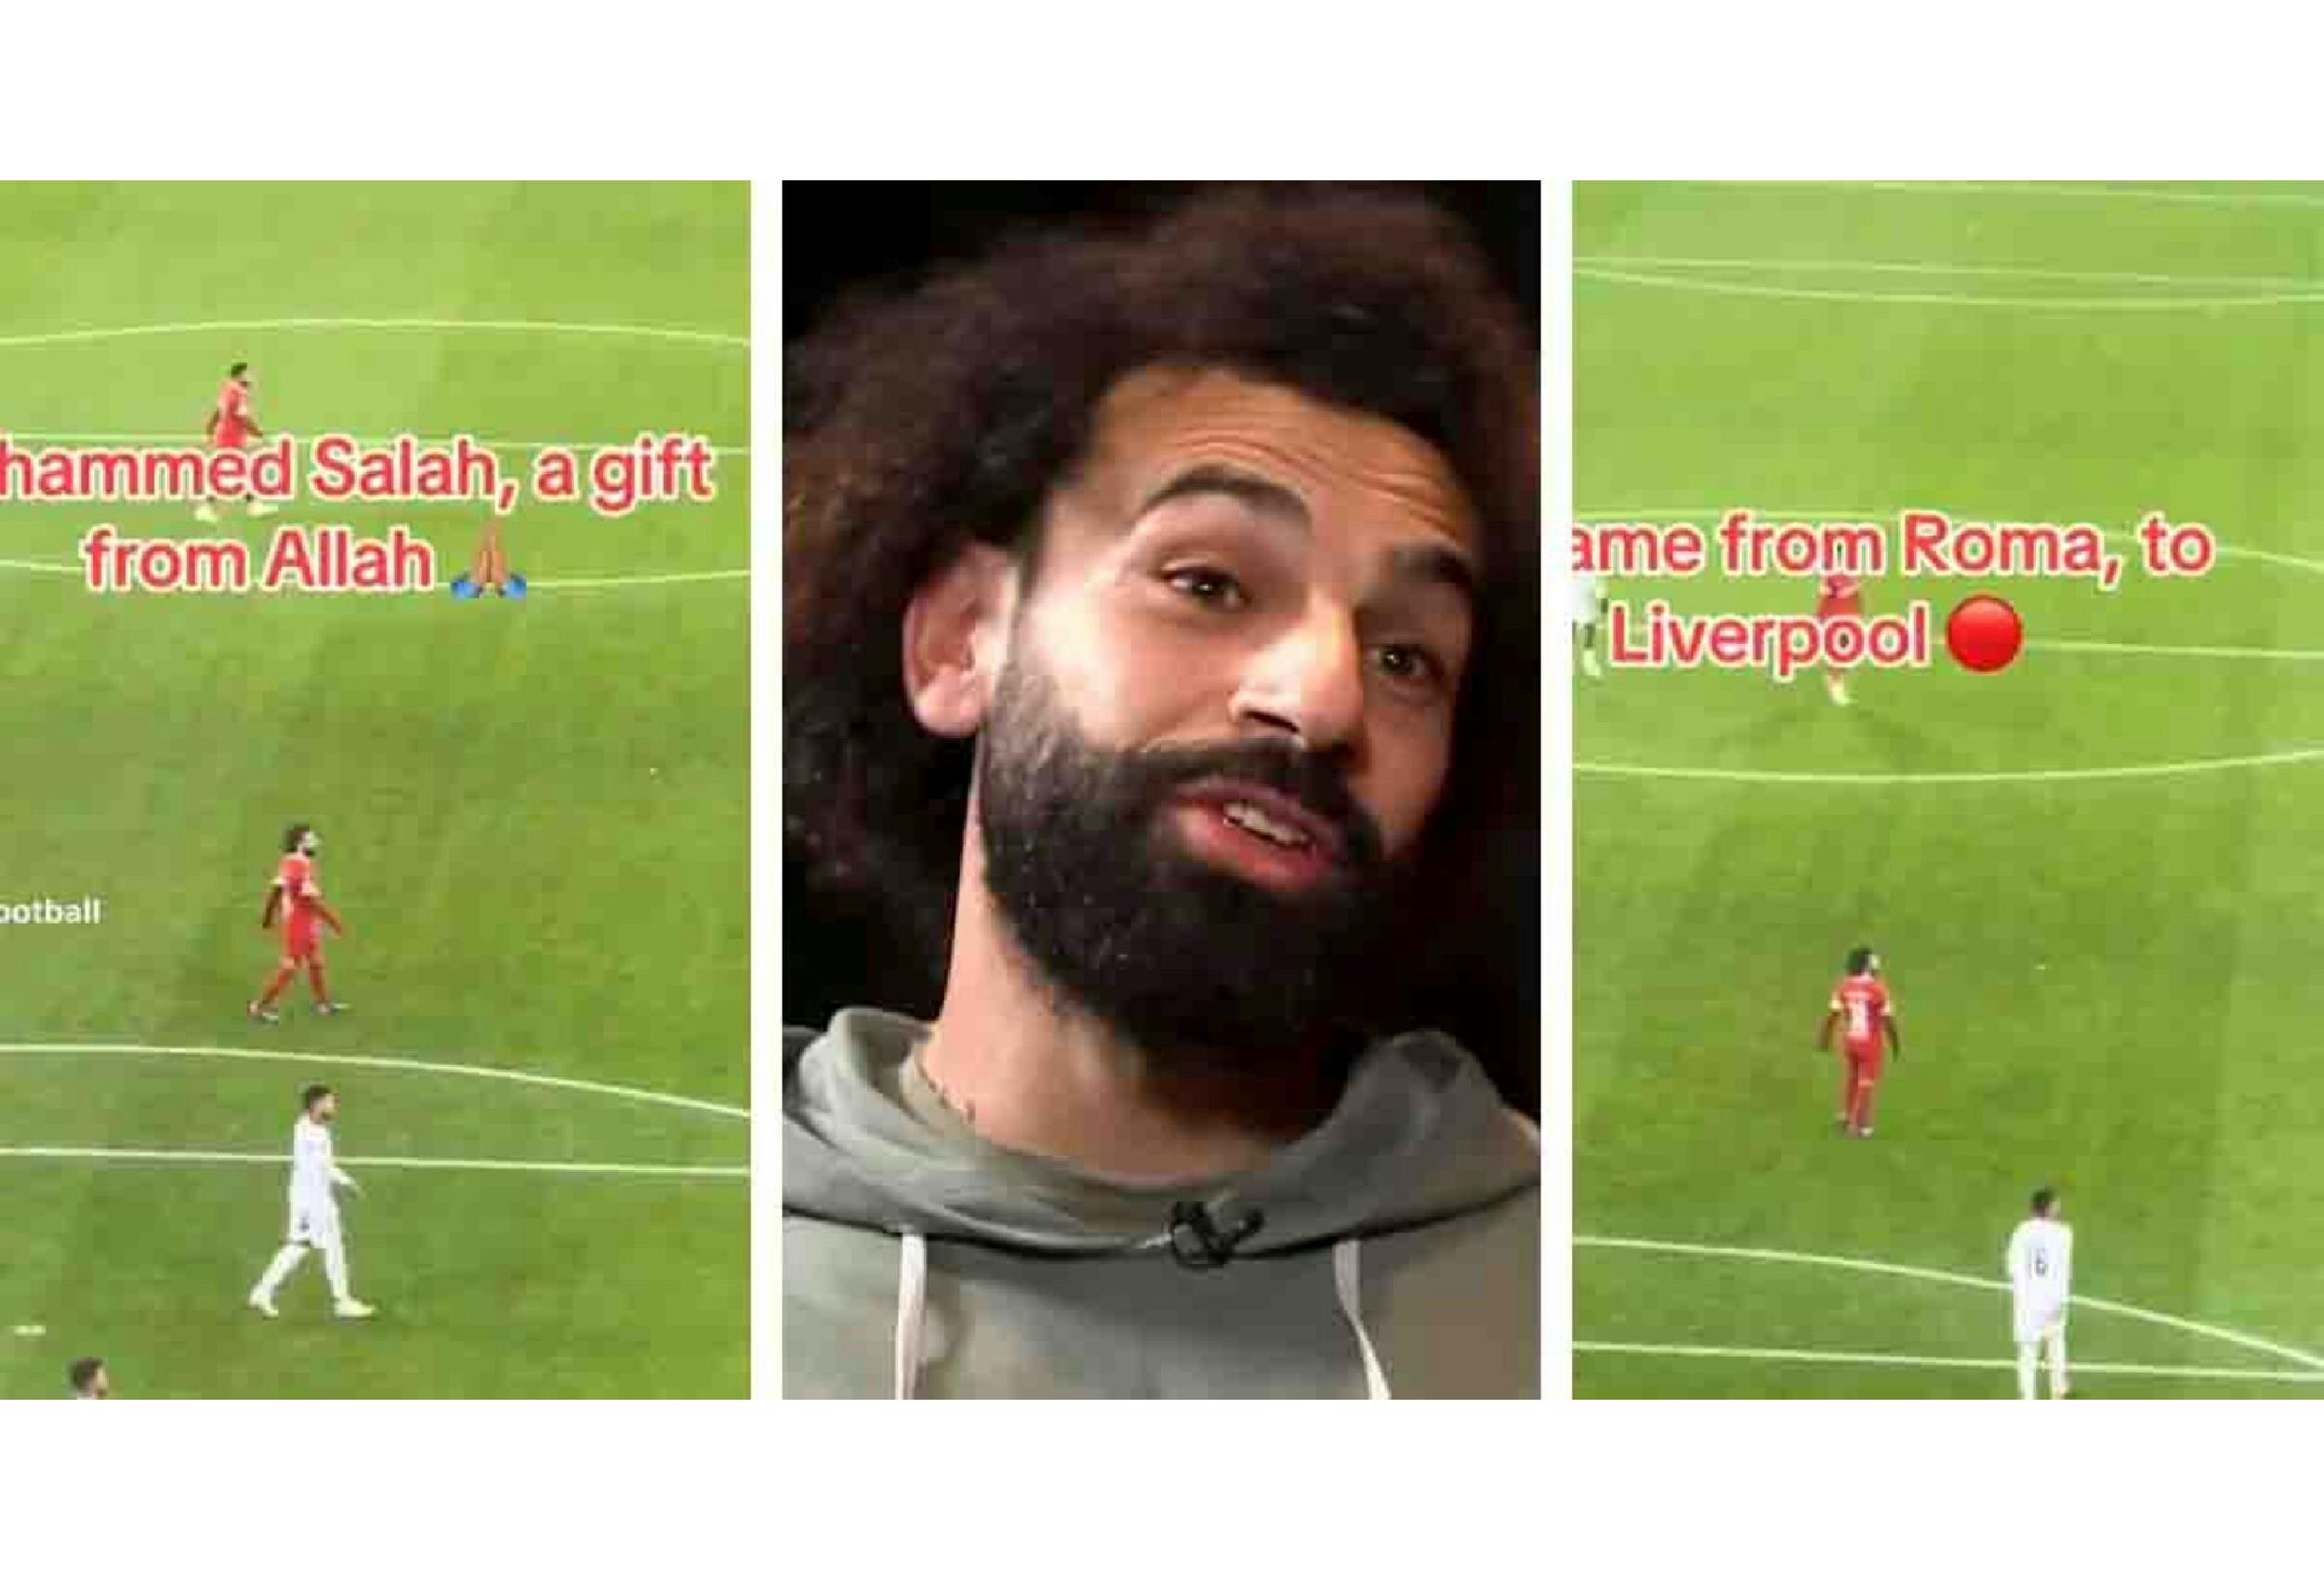 Liverpool Fans Unveil New Mohamed Salah Chant Set To Johnny Cash Classic